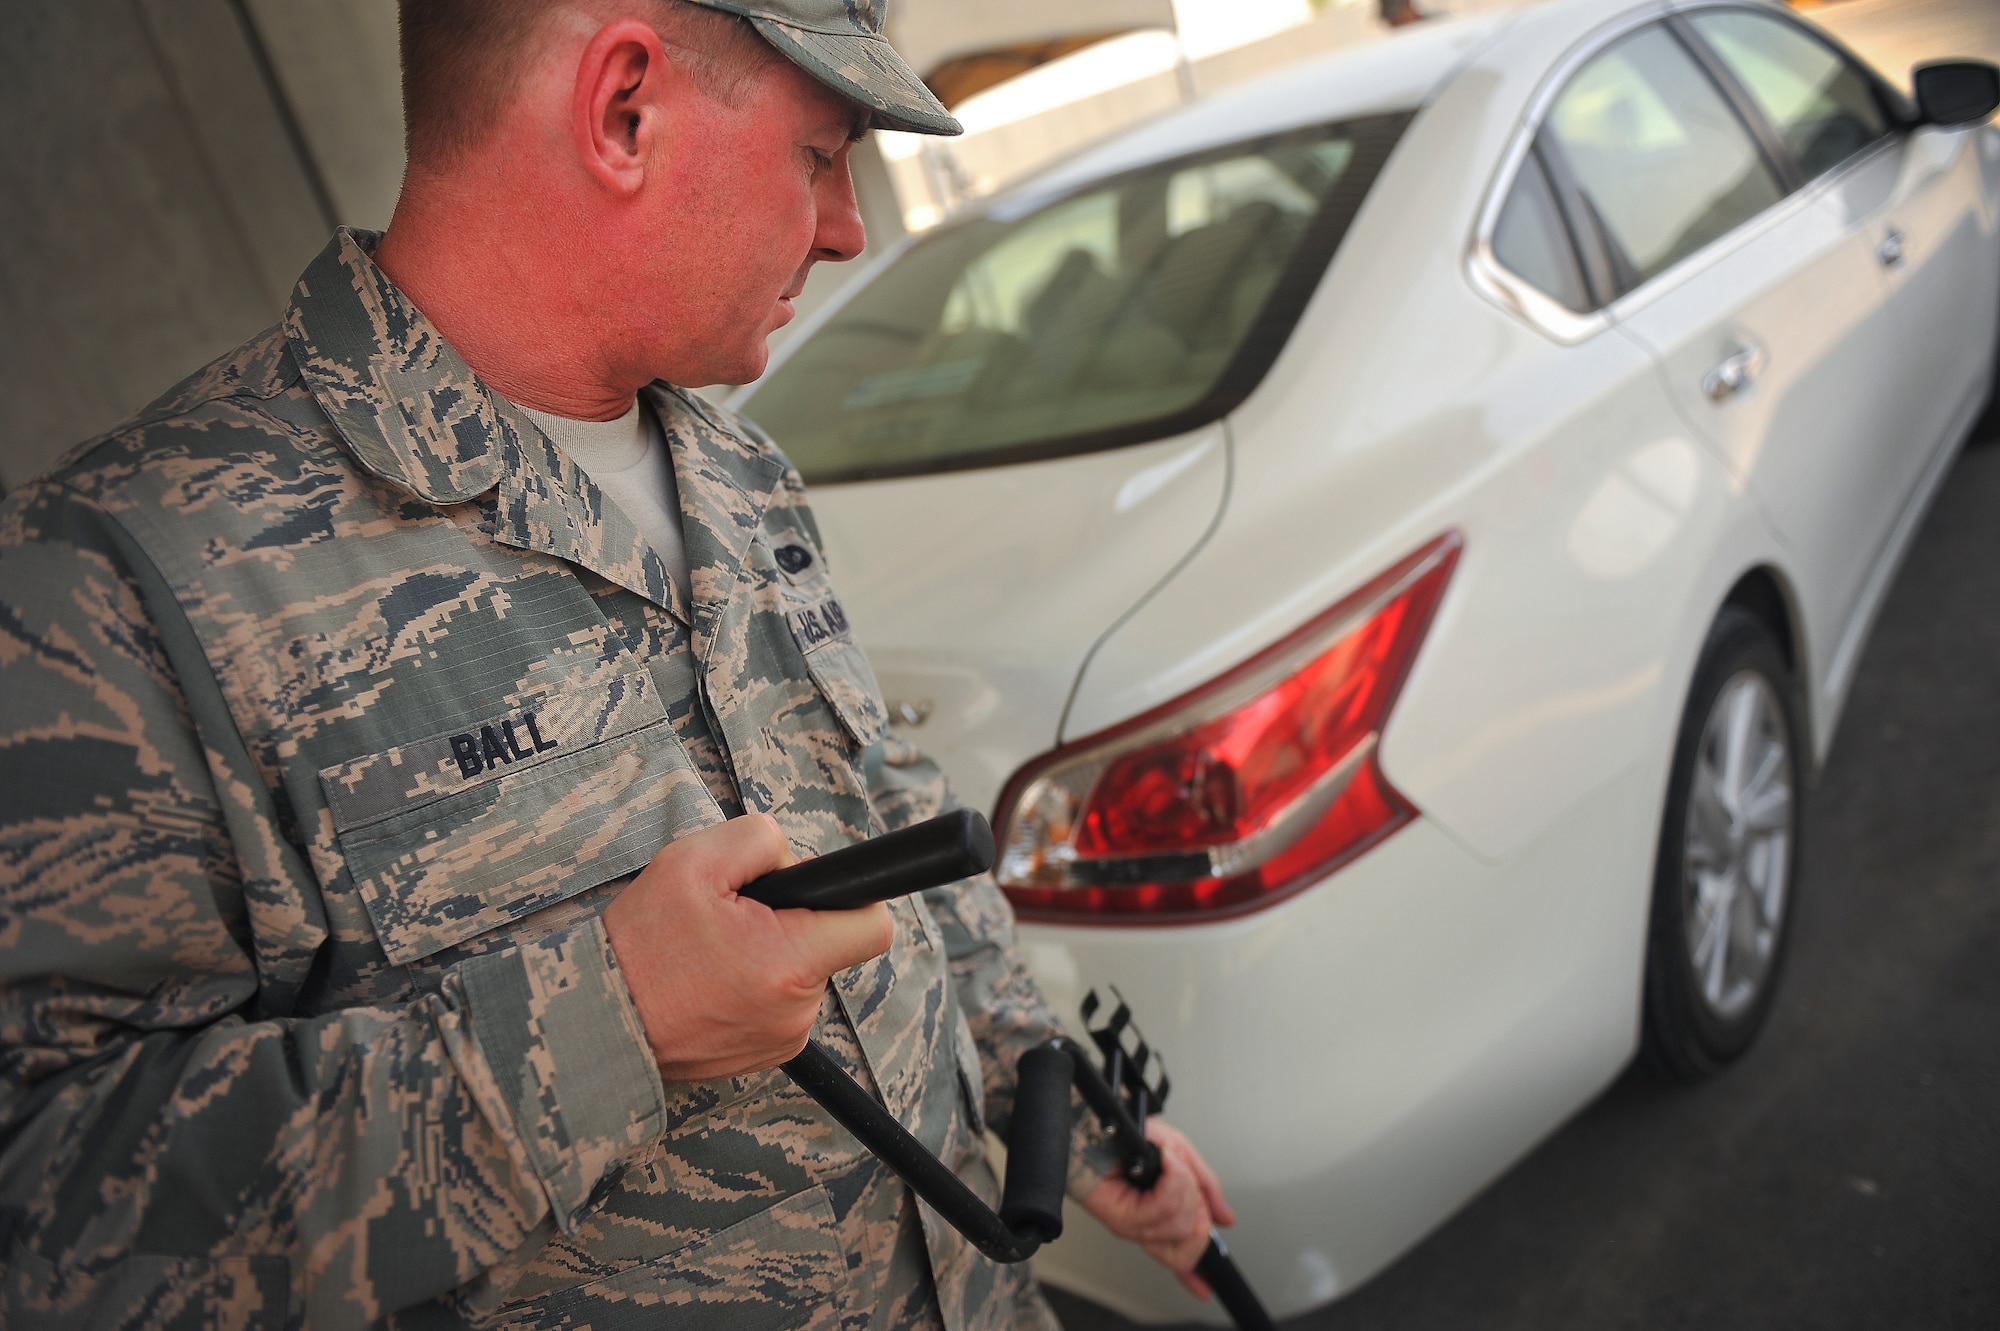 Staff Sgt. Ronald Ball performs a security check on a vehicle June 25, 2014, at an undisclosed location in Southwest Asia. Ball, 50 years old, was recently promoted to the rank of staff sergeant during his deployment to Southwest Asia. Ball is with the 380th Expeditionary Security Forces Squadron. (U.S. Air Force photo/Tech. Sgt. Russ Scalf)